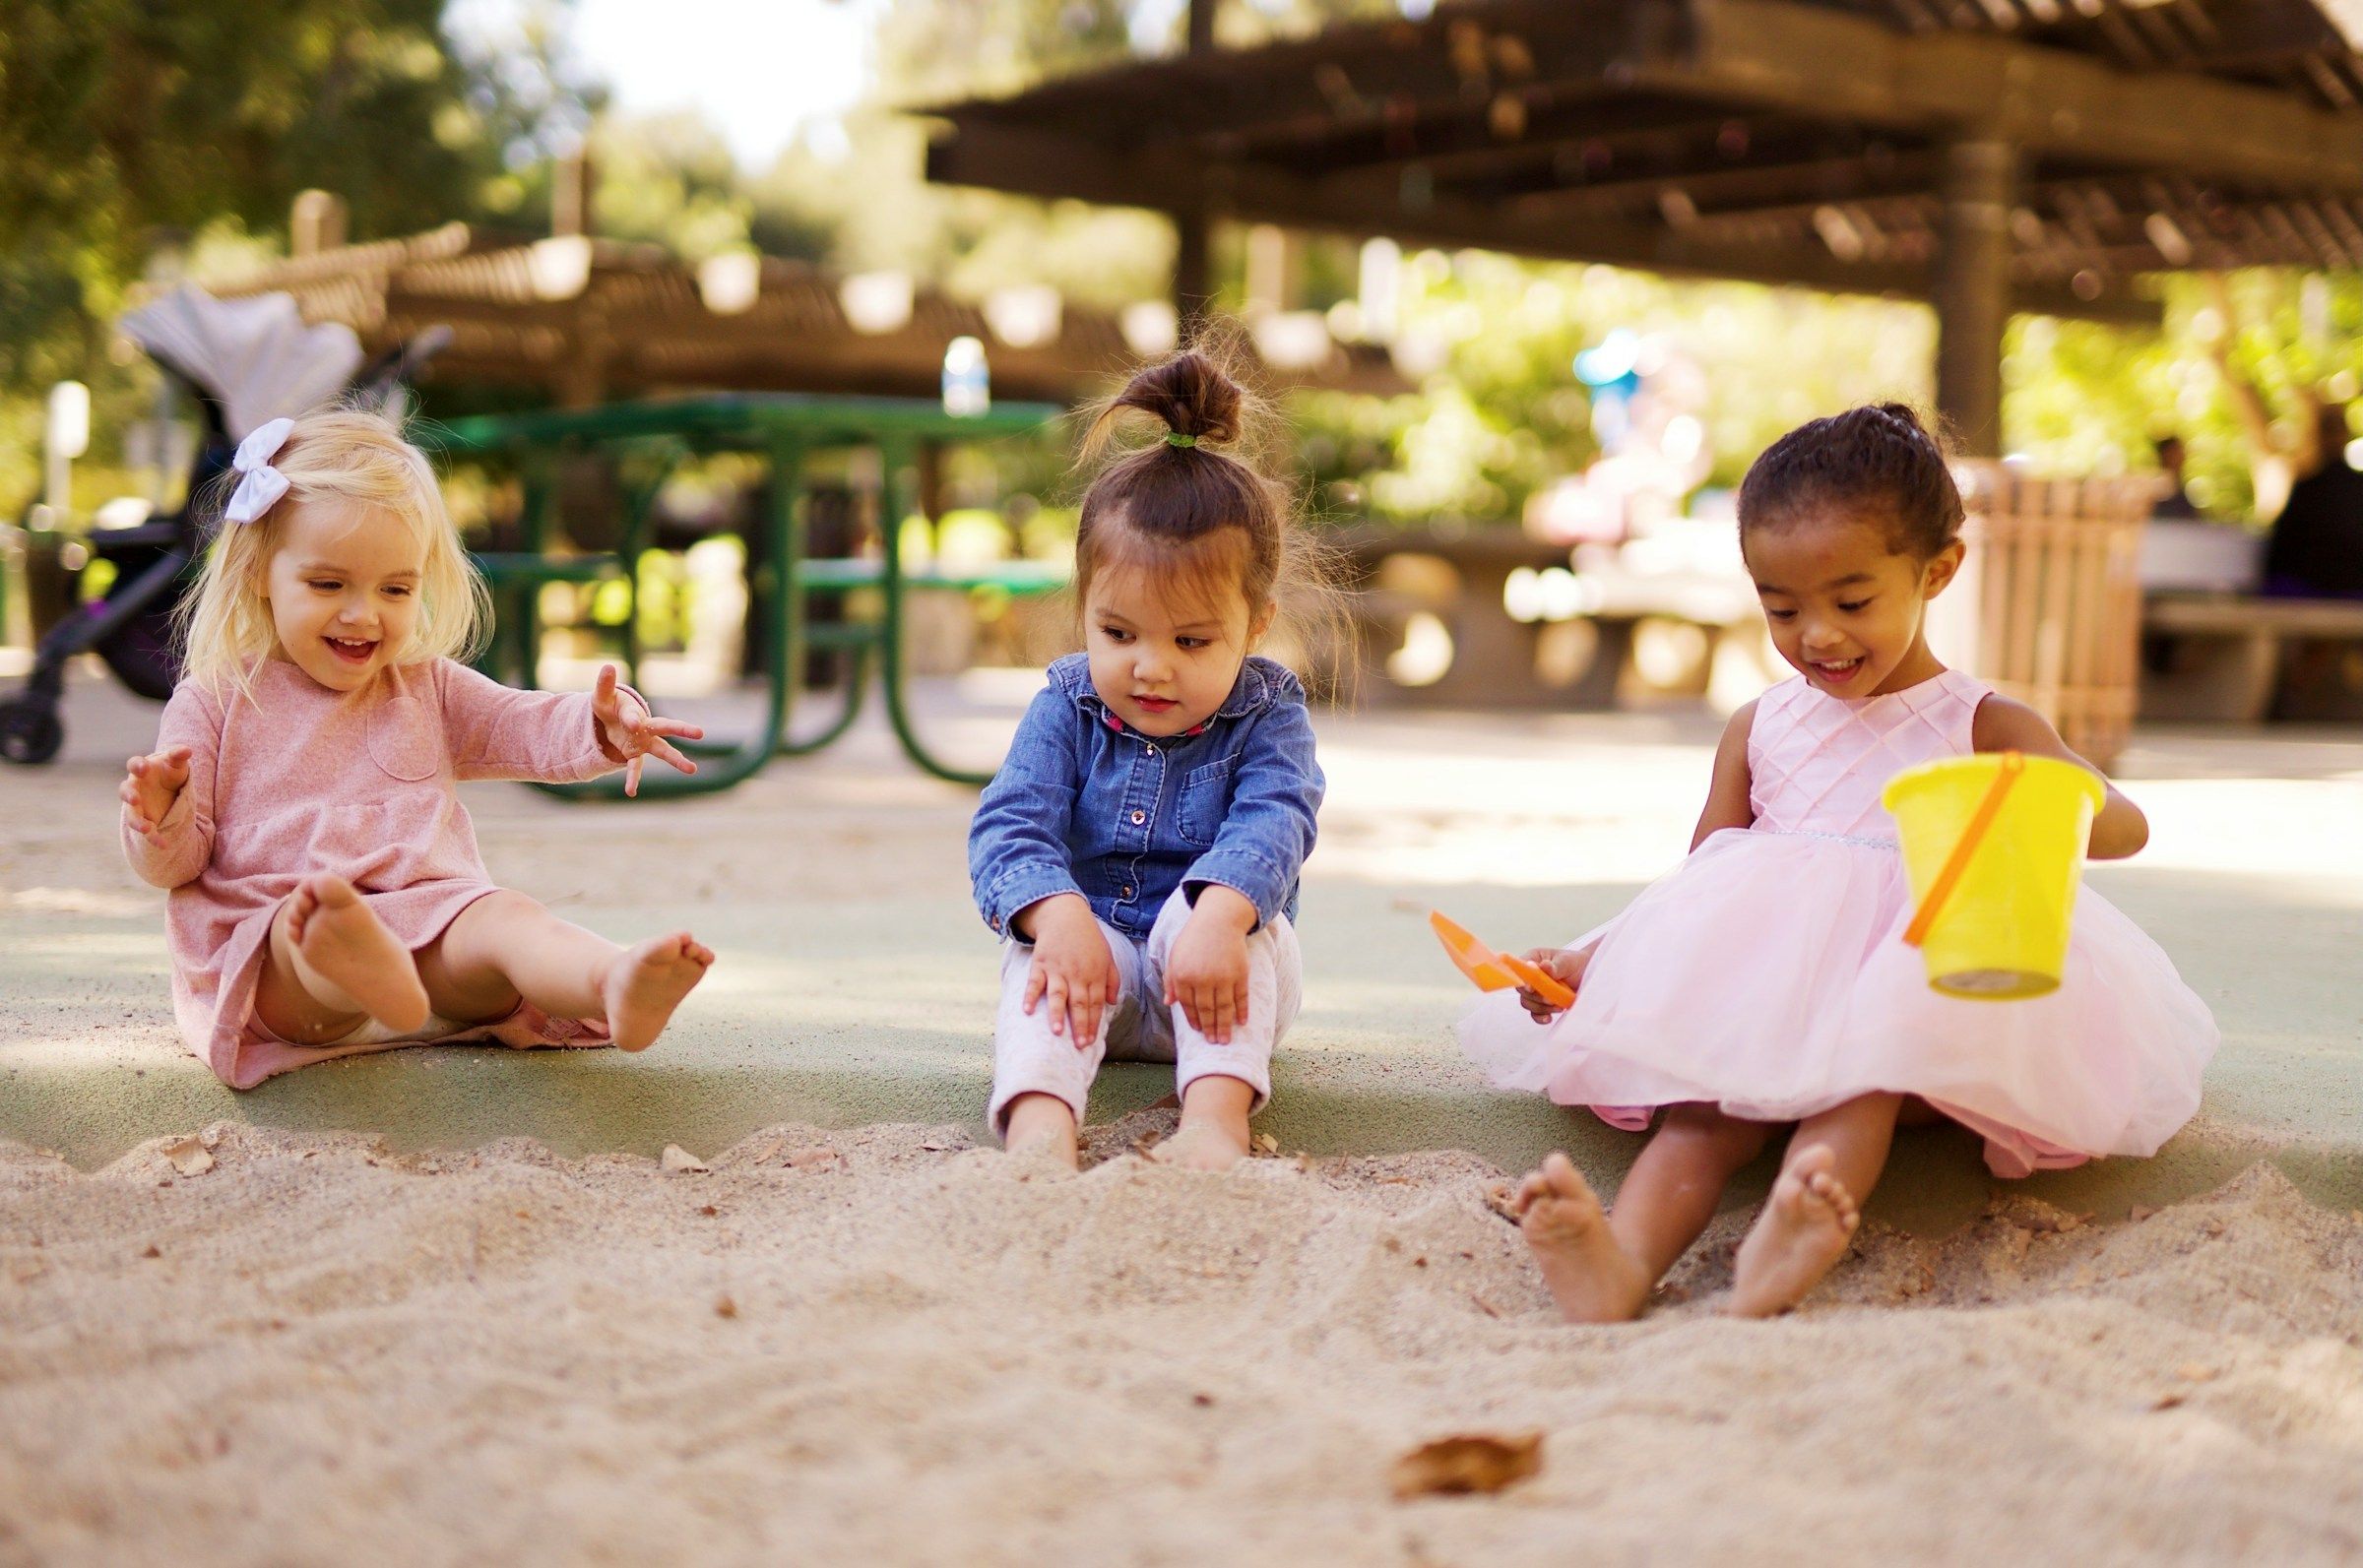 Little girls playing in sand.